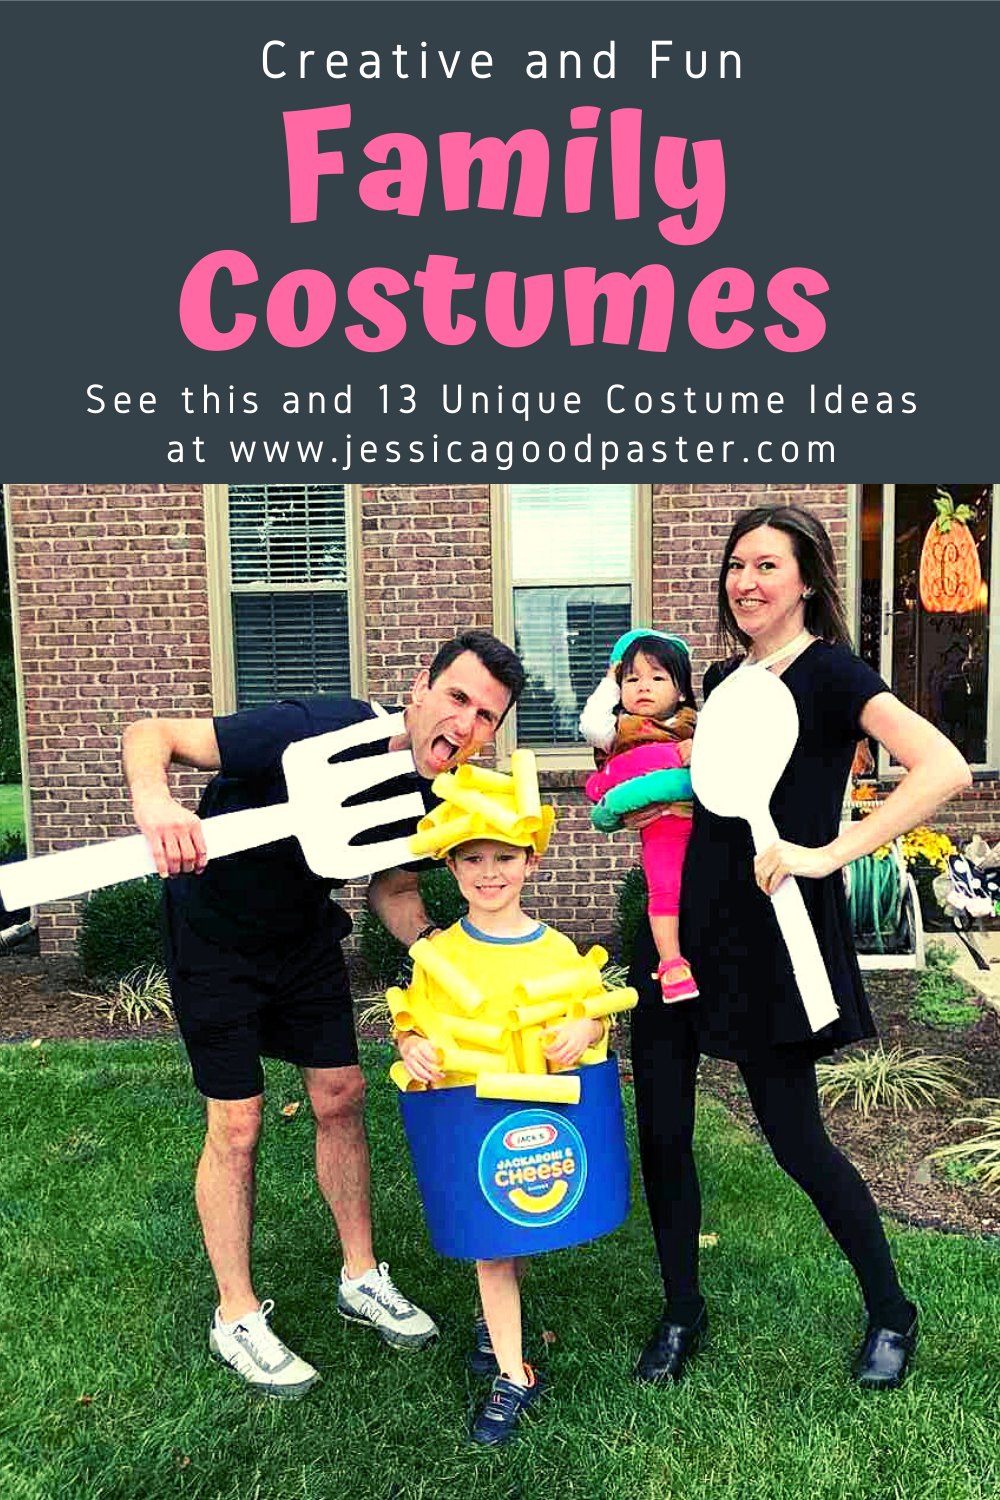 13 Unique Halloween Costume Ideas for Your Family or Group! Find the perfect costume for individuals, couples, families, groups, and kids. Includes some of the best DIY costume ideas as well. #halloween #costumes #halloweencostumes #couplecostumes #groupcostume #diycostumes #familycostume #trunkortreat